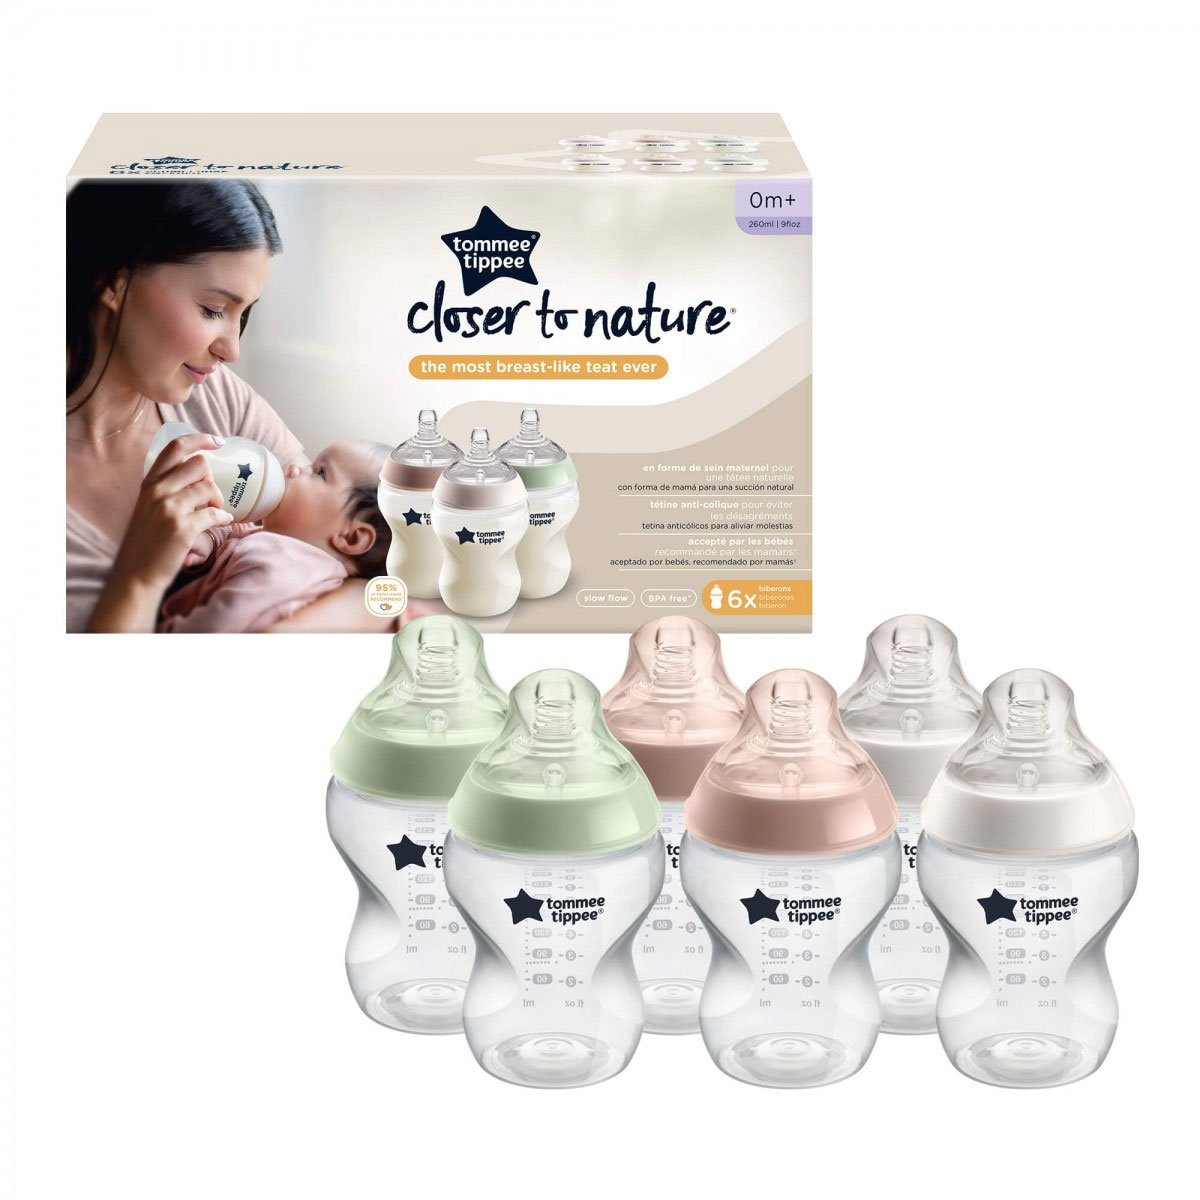 Tommee Tippee Closer to Nature 6 Pack (260ml) Baby Bottles - Natural